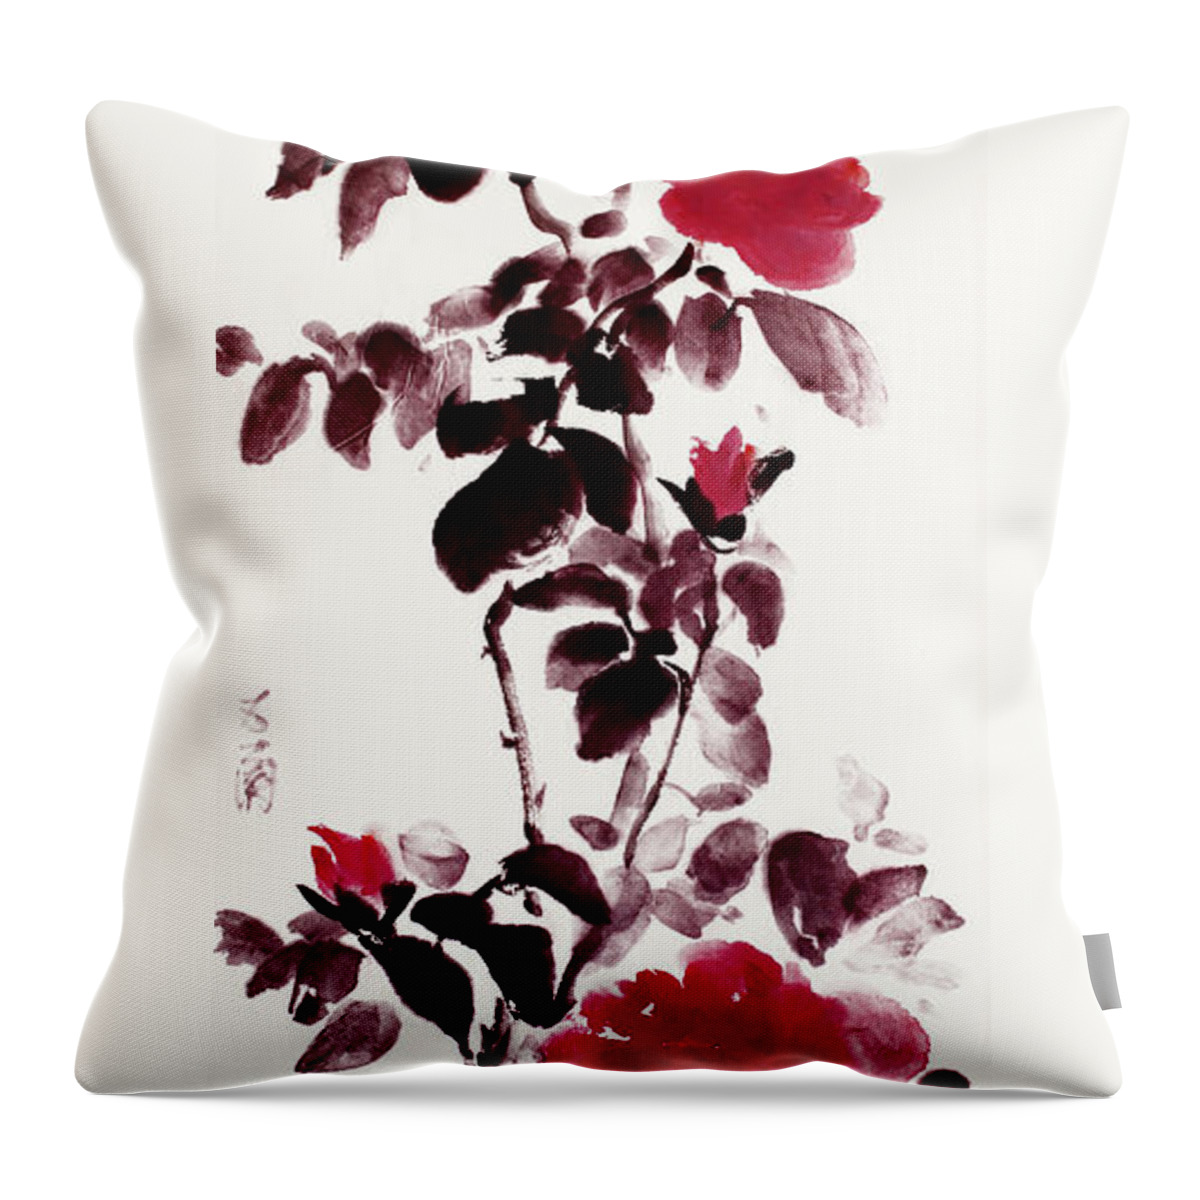 Rose Throw Pillow featuring the painting Roses, Delicate Beauty And Fragrance by Nadja Van Ghelue